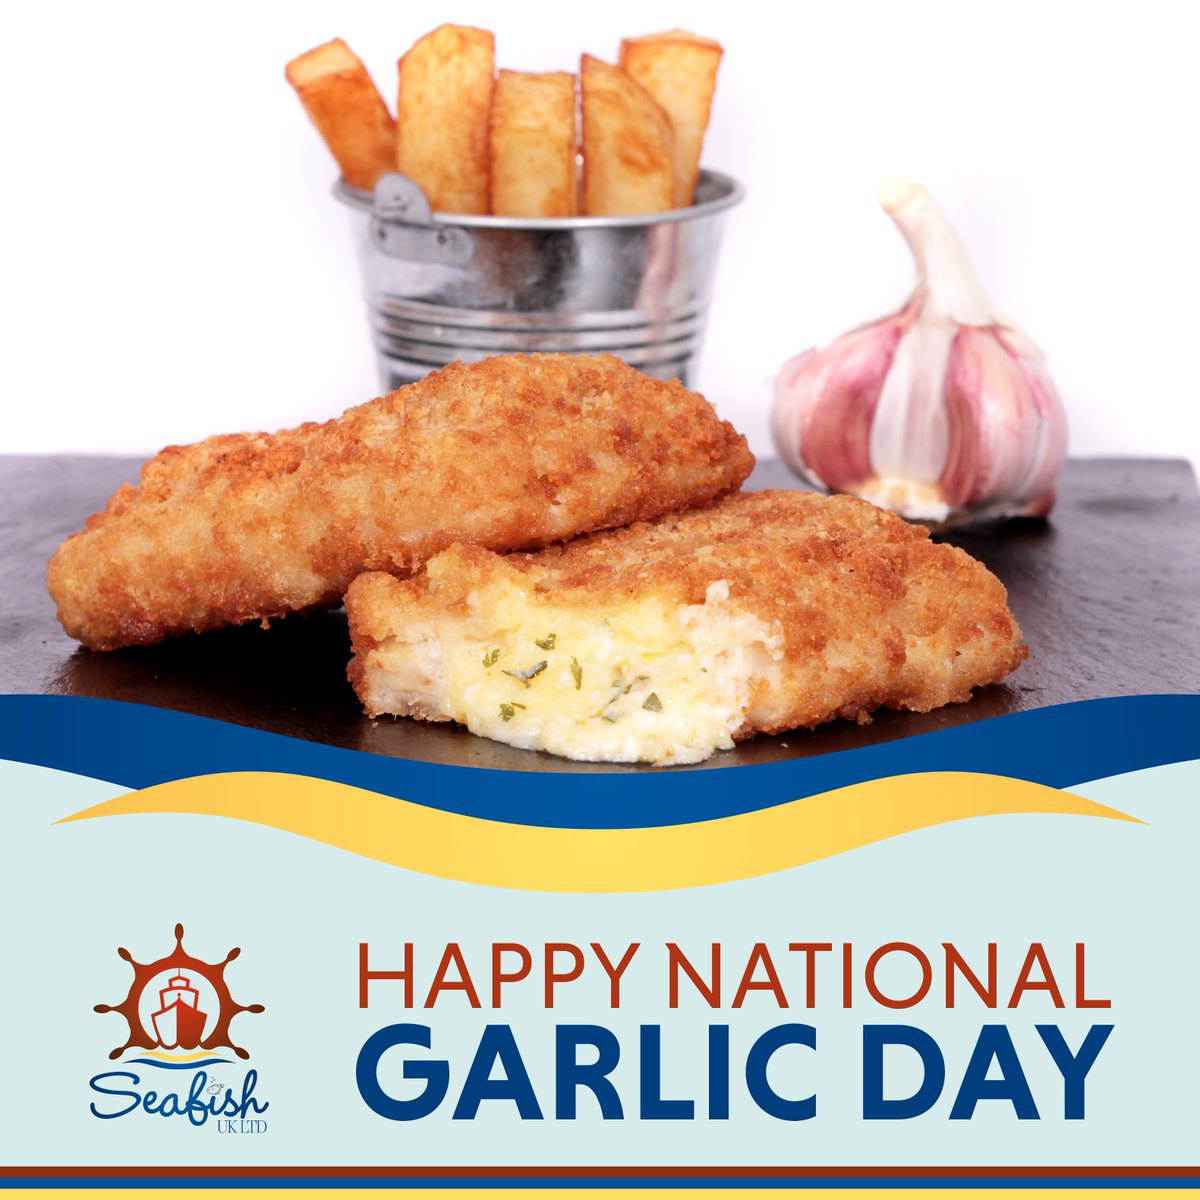 Happy #NationalGarlicDay! 🧄💖

Also known as the Stinking Rose, garlic is an ingredient that is adored and celebrated in all cultures across the globe (because EVERYONE loves garlic 😋)